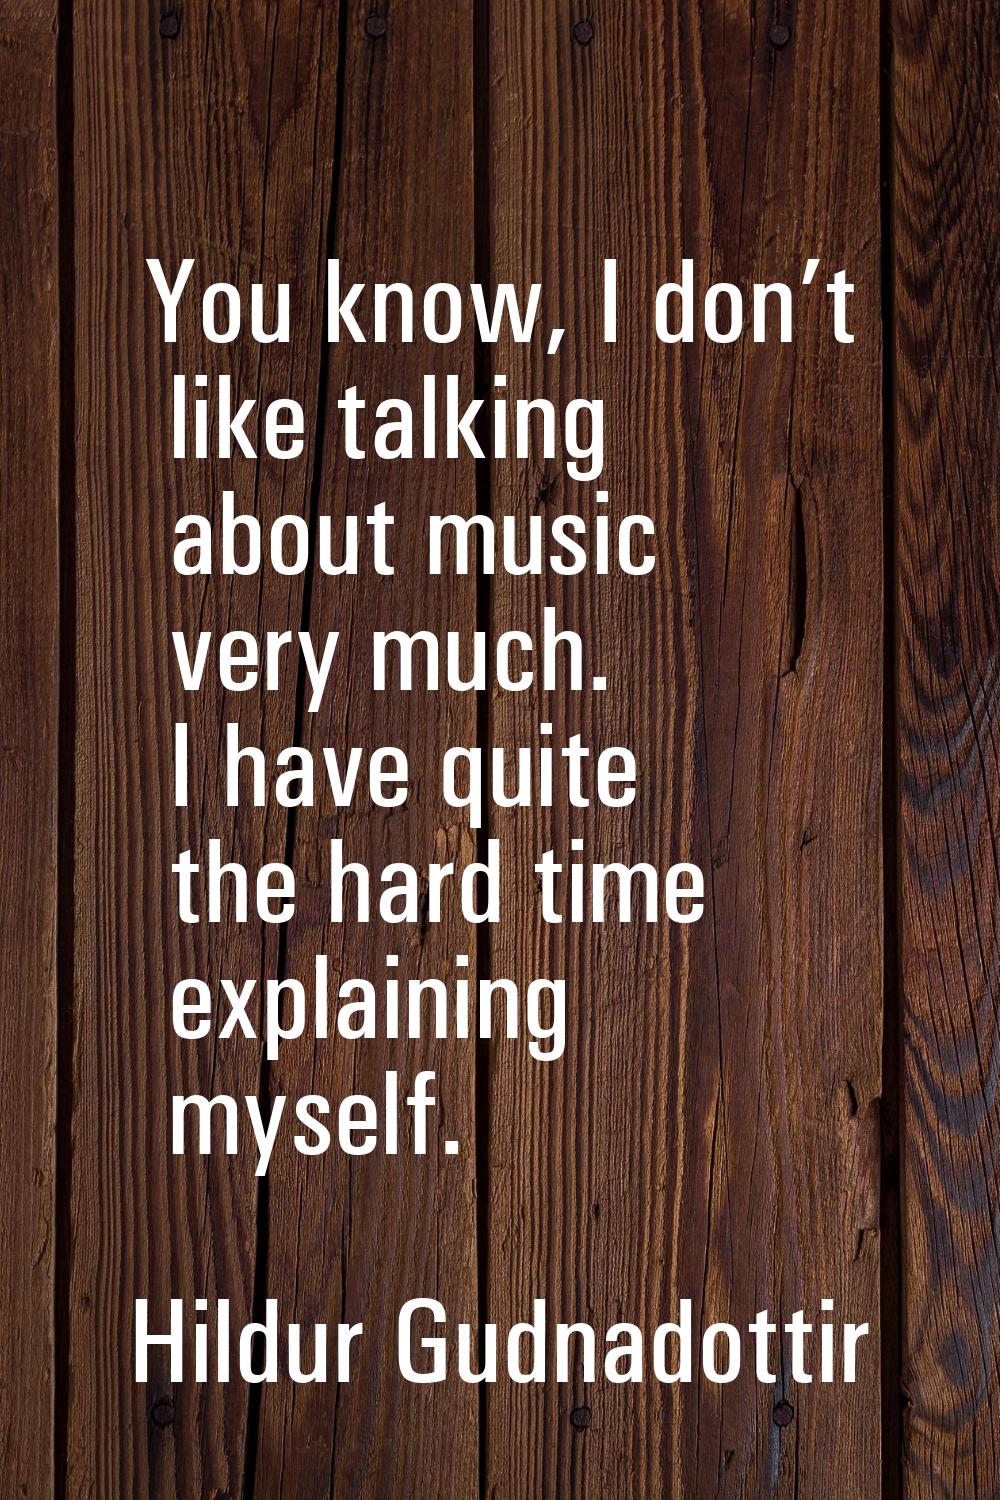 You know, I don’t like talking about music very much. I have quite the hard time explaining myself.